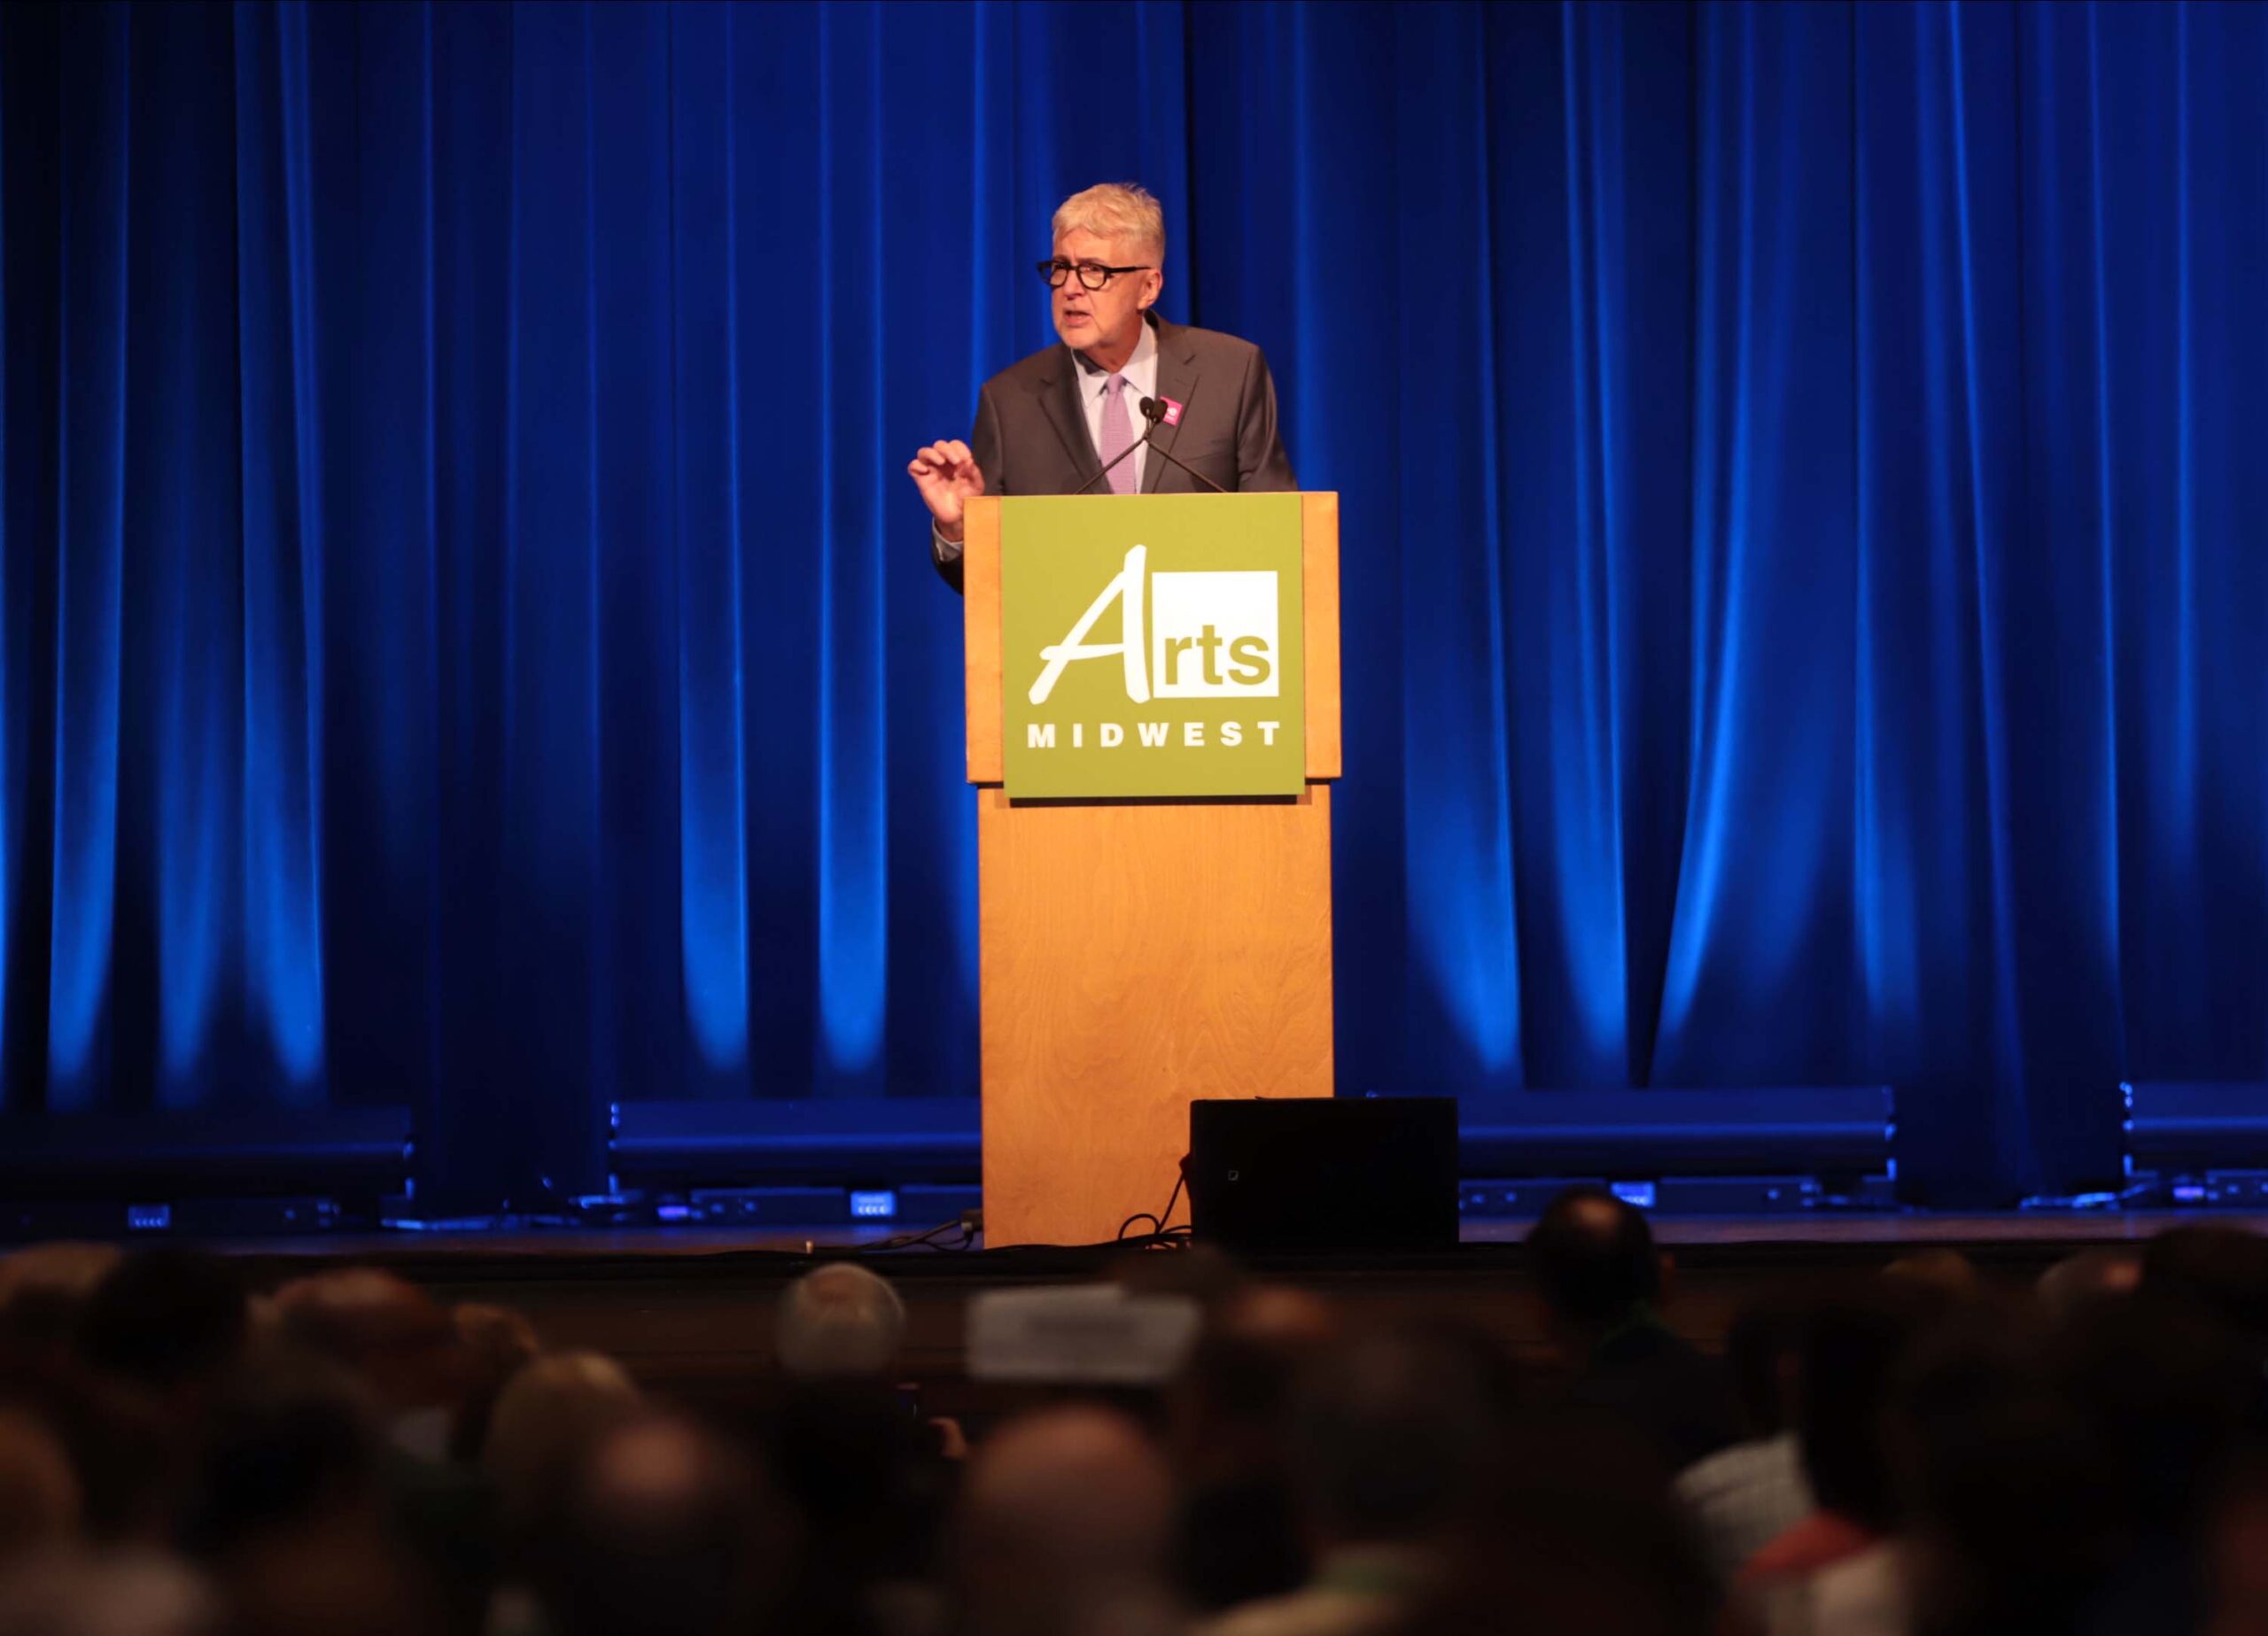 David Fraher gives his farewell speech at the 2019 Arts Midwest Conference.